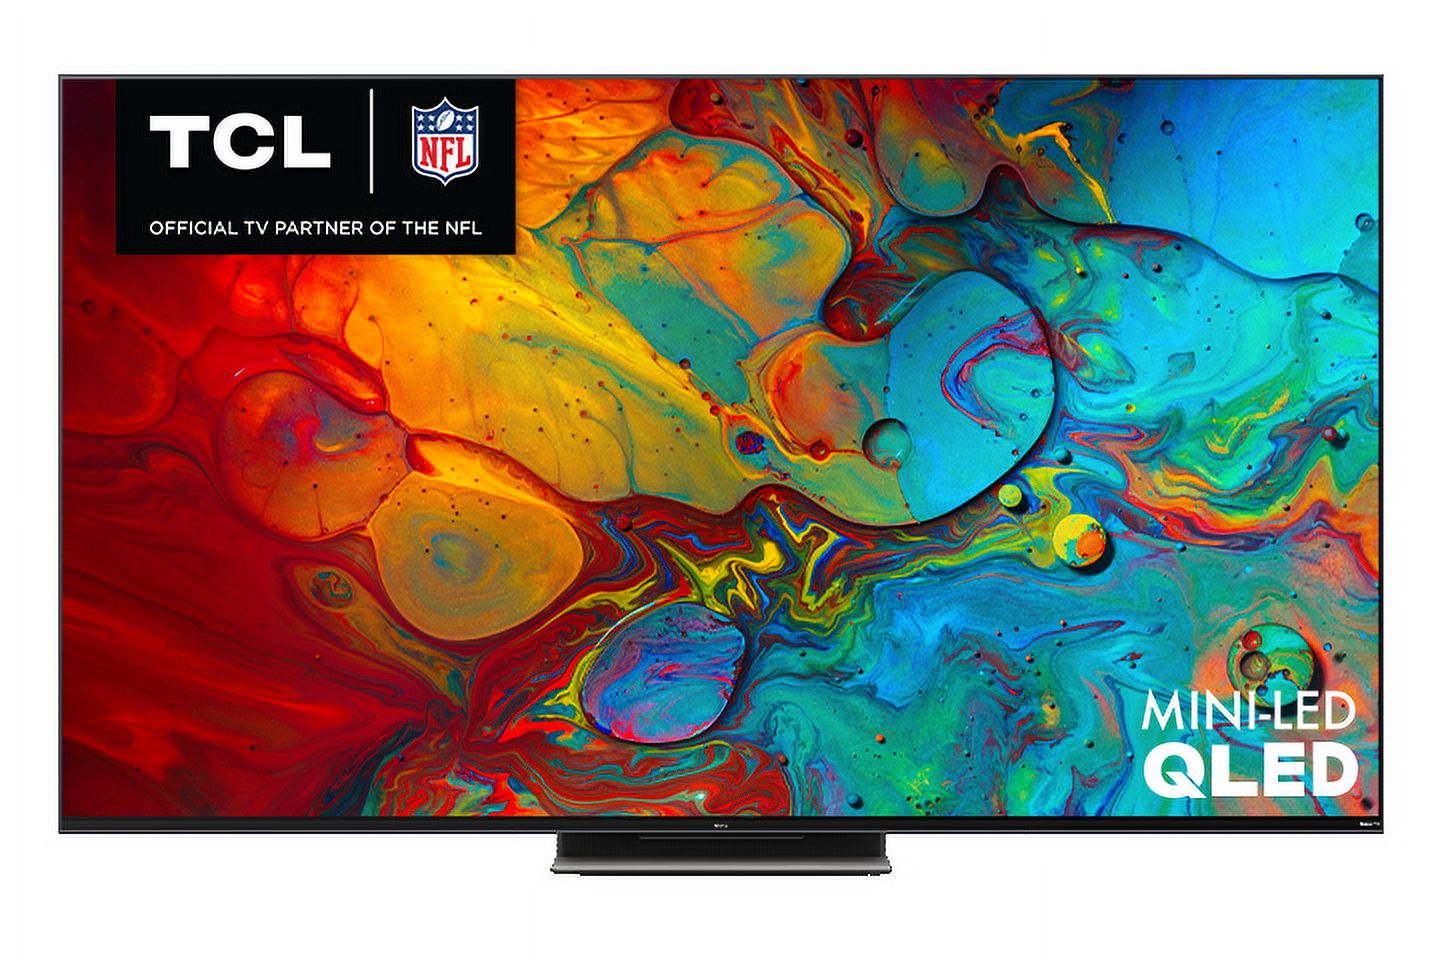 TCL 75" Class 6-Series 4K Mini-LED UHD QLED Dolby Vision HDR Smart Roku TV – 75R655 (New) - image 1 of 7